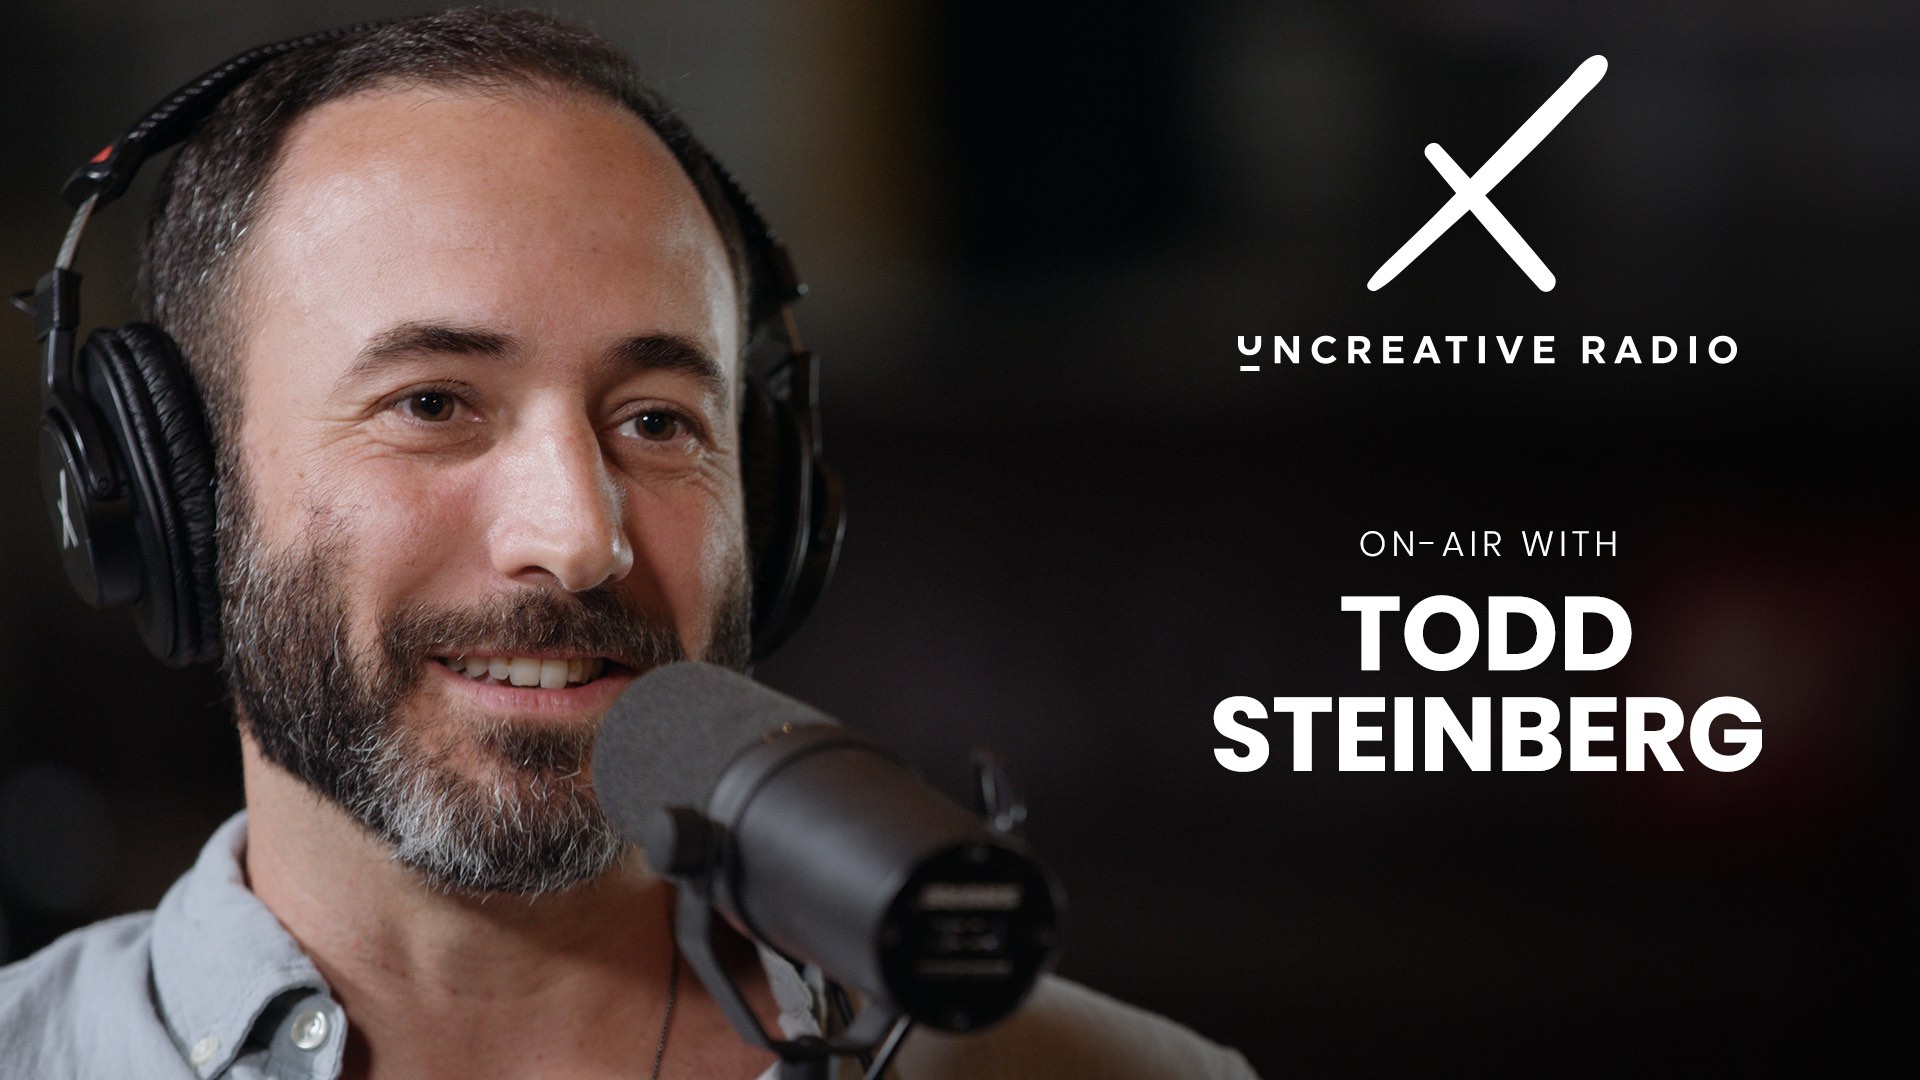 Uncreative Radio on air with Todd Steinberg with short hair and beard wearing black headphones talking into a microphone